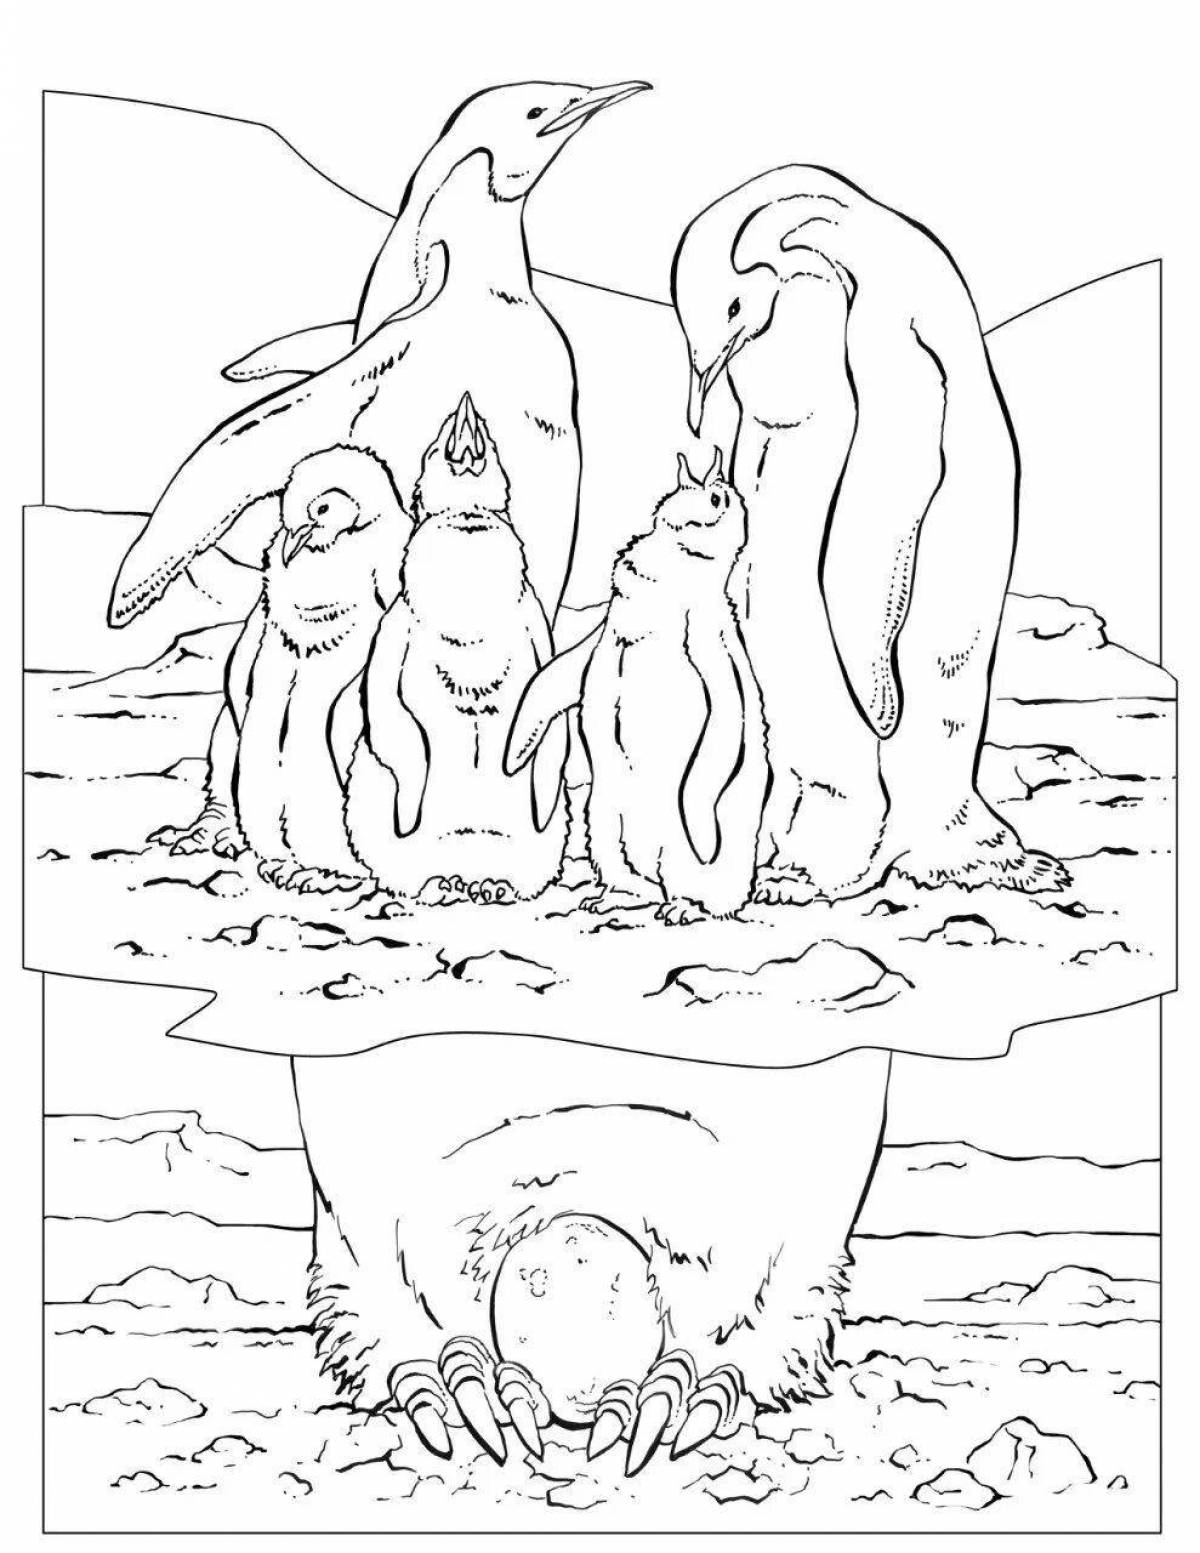 Coloring book of a family of smiling penguins